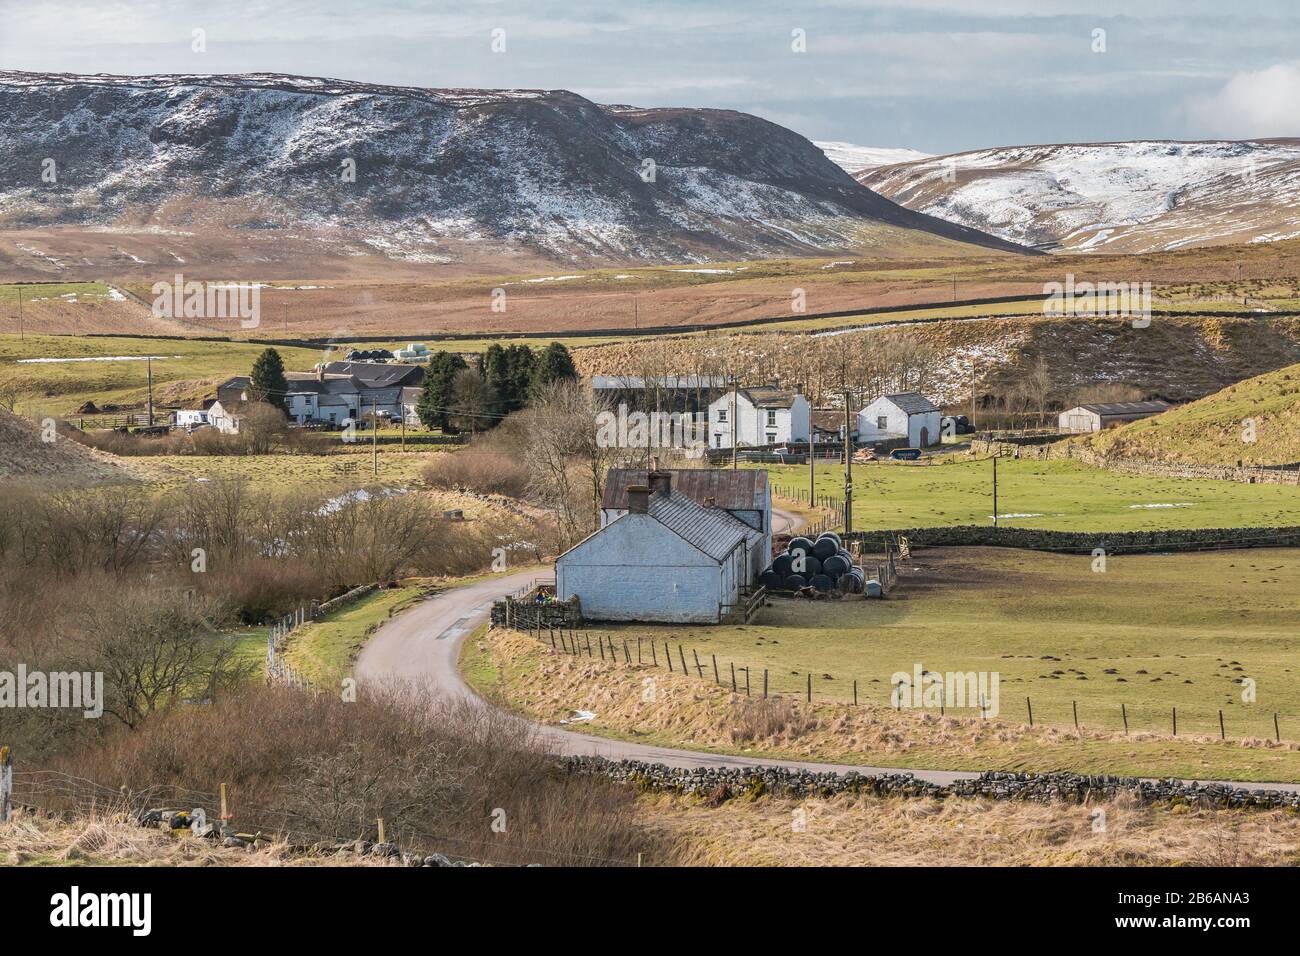 The remote farming hamlet of Langdon Beck in Upper Teesdale, with a covering of snow on the dramatic Cronkley Scar in the background. Stock Photo